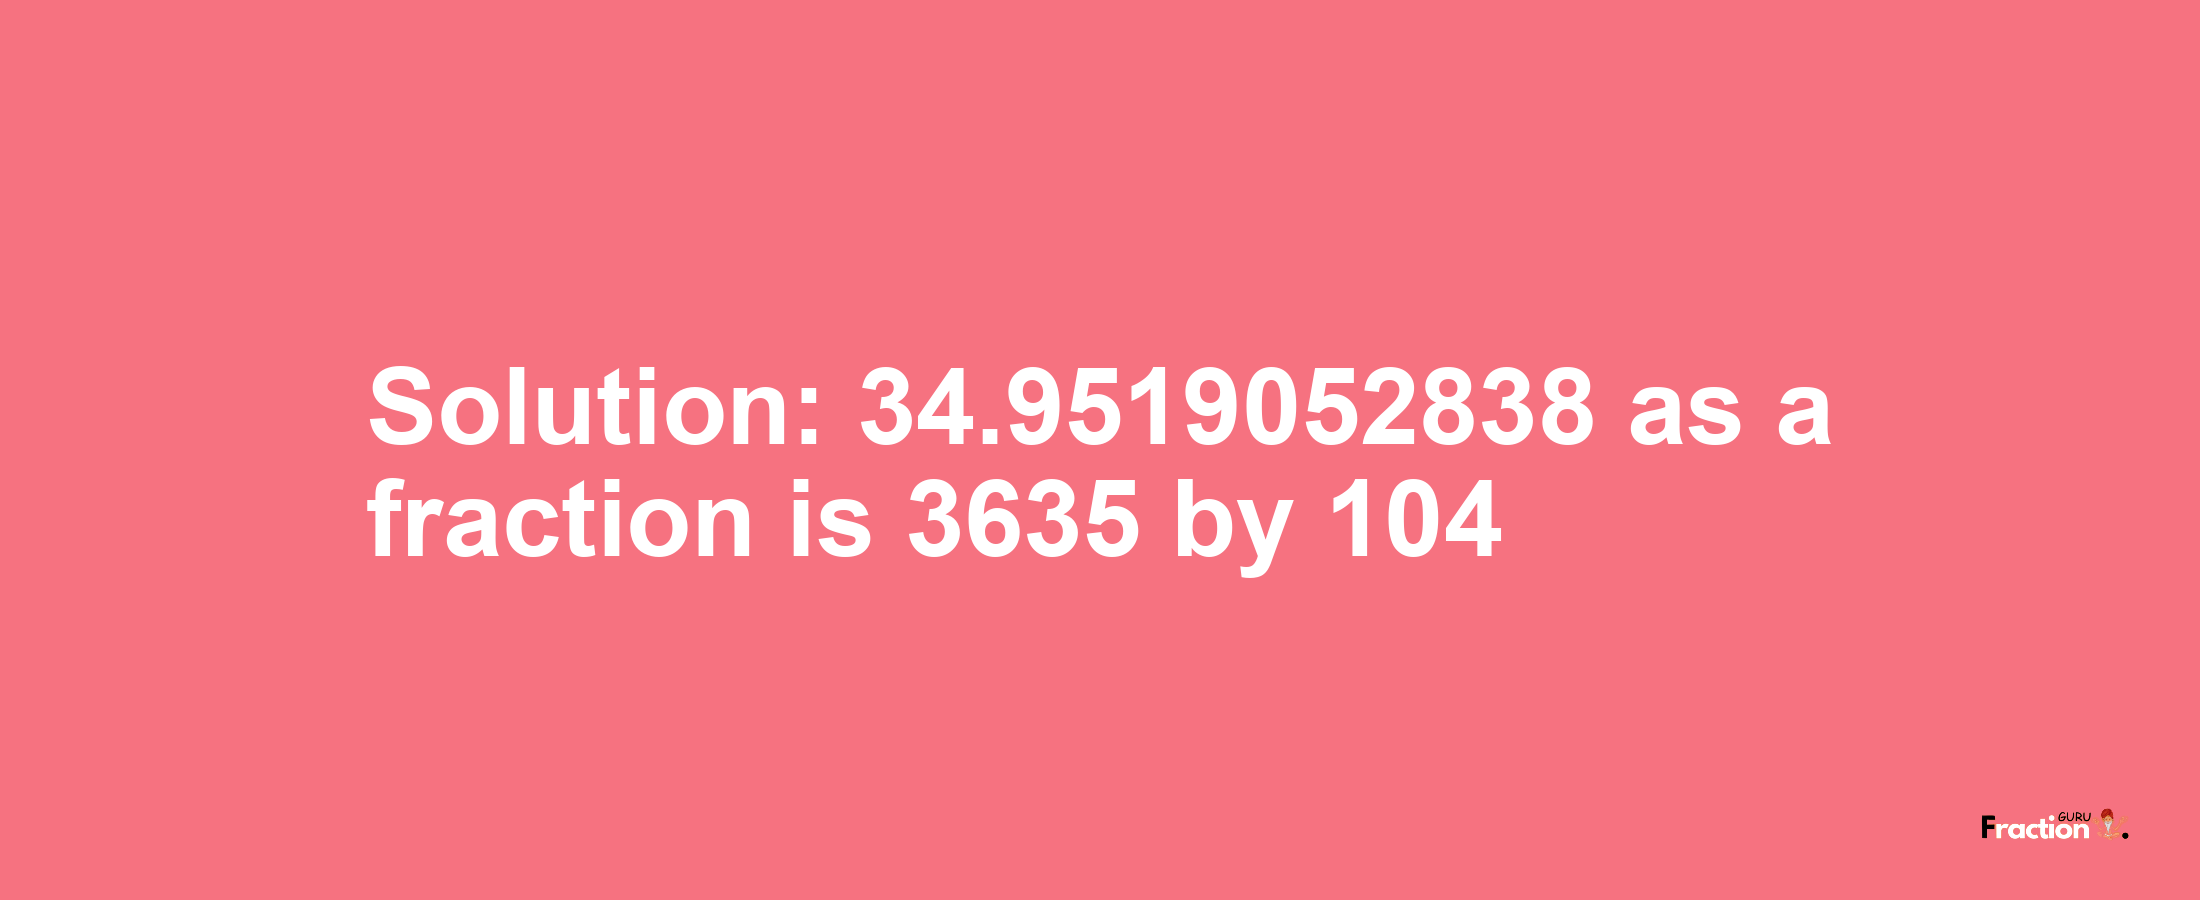 Solution:34.9519052838 as a fraction is 3635/104